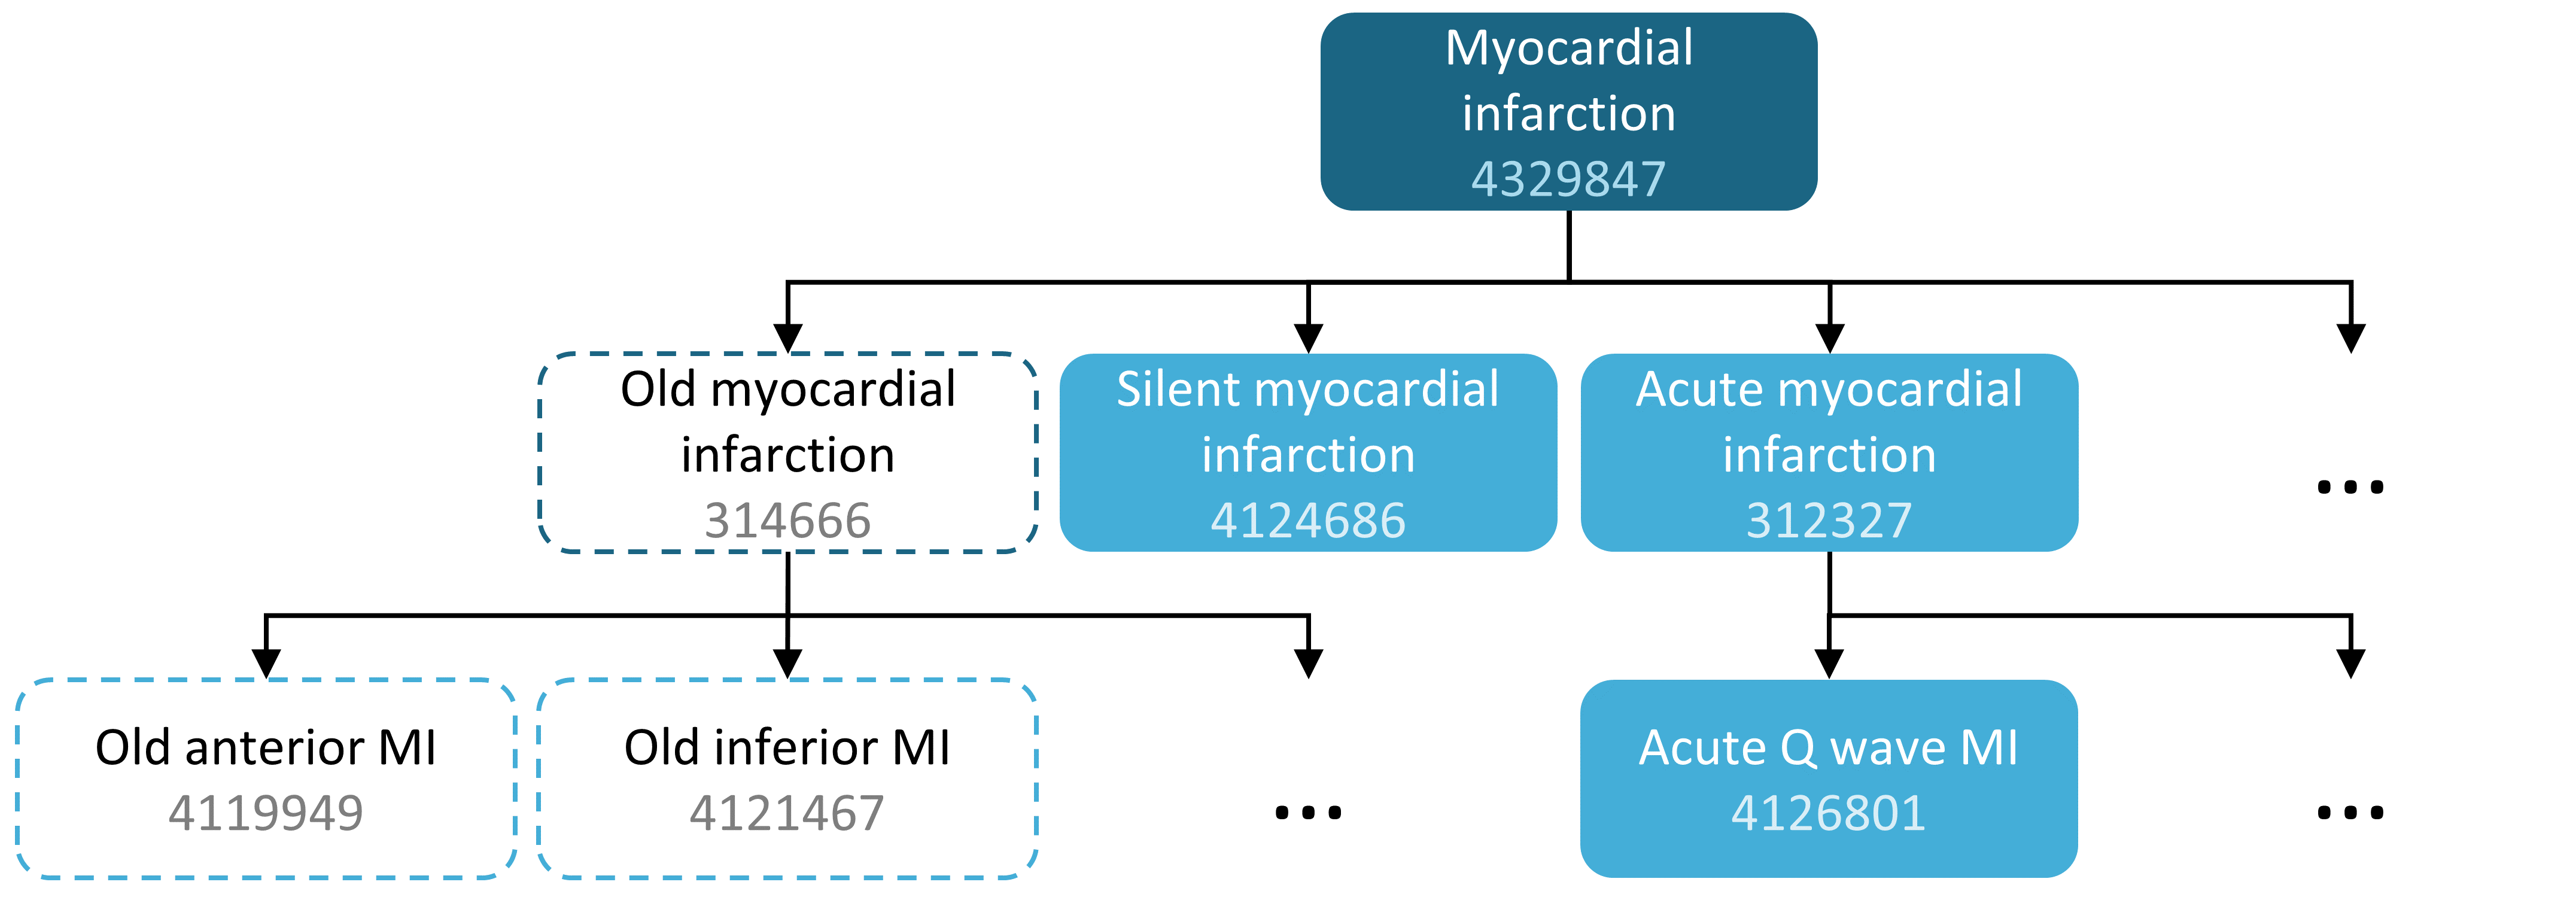 A concept set including "Myocardial infarction" (with descendants), but excluding "Old myocardial infarction" (with descendants).